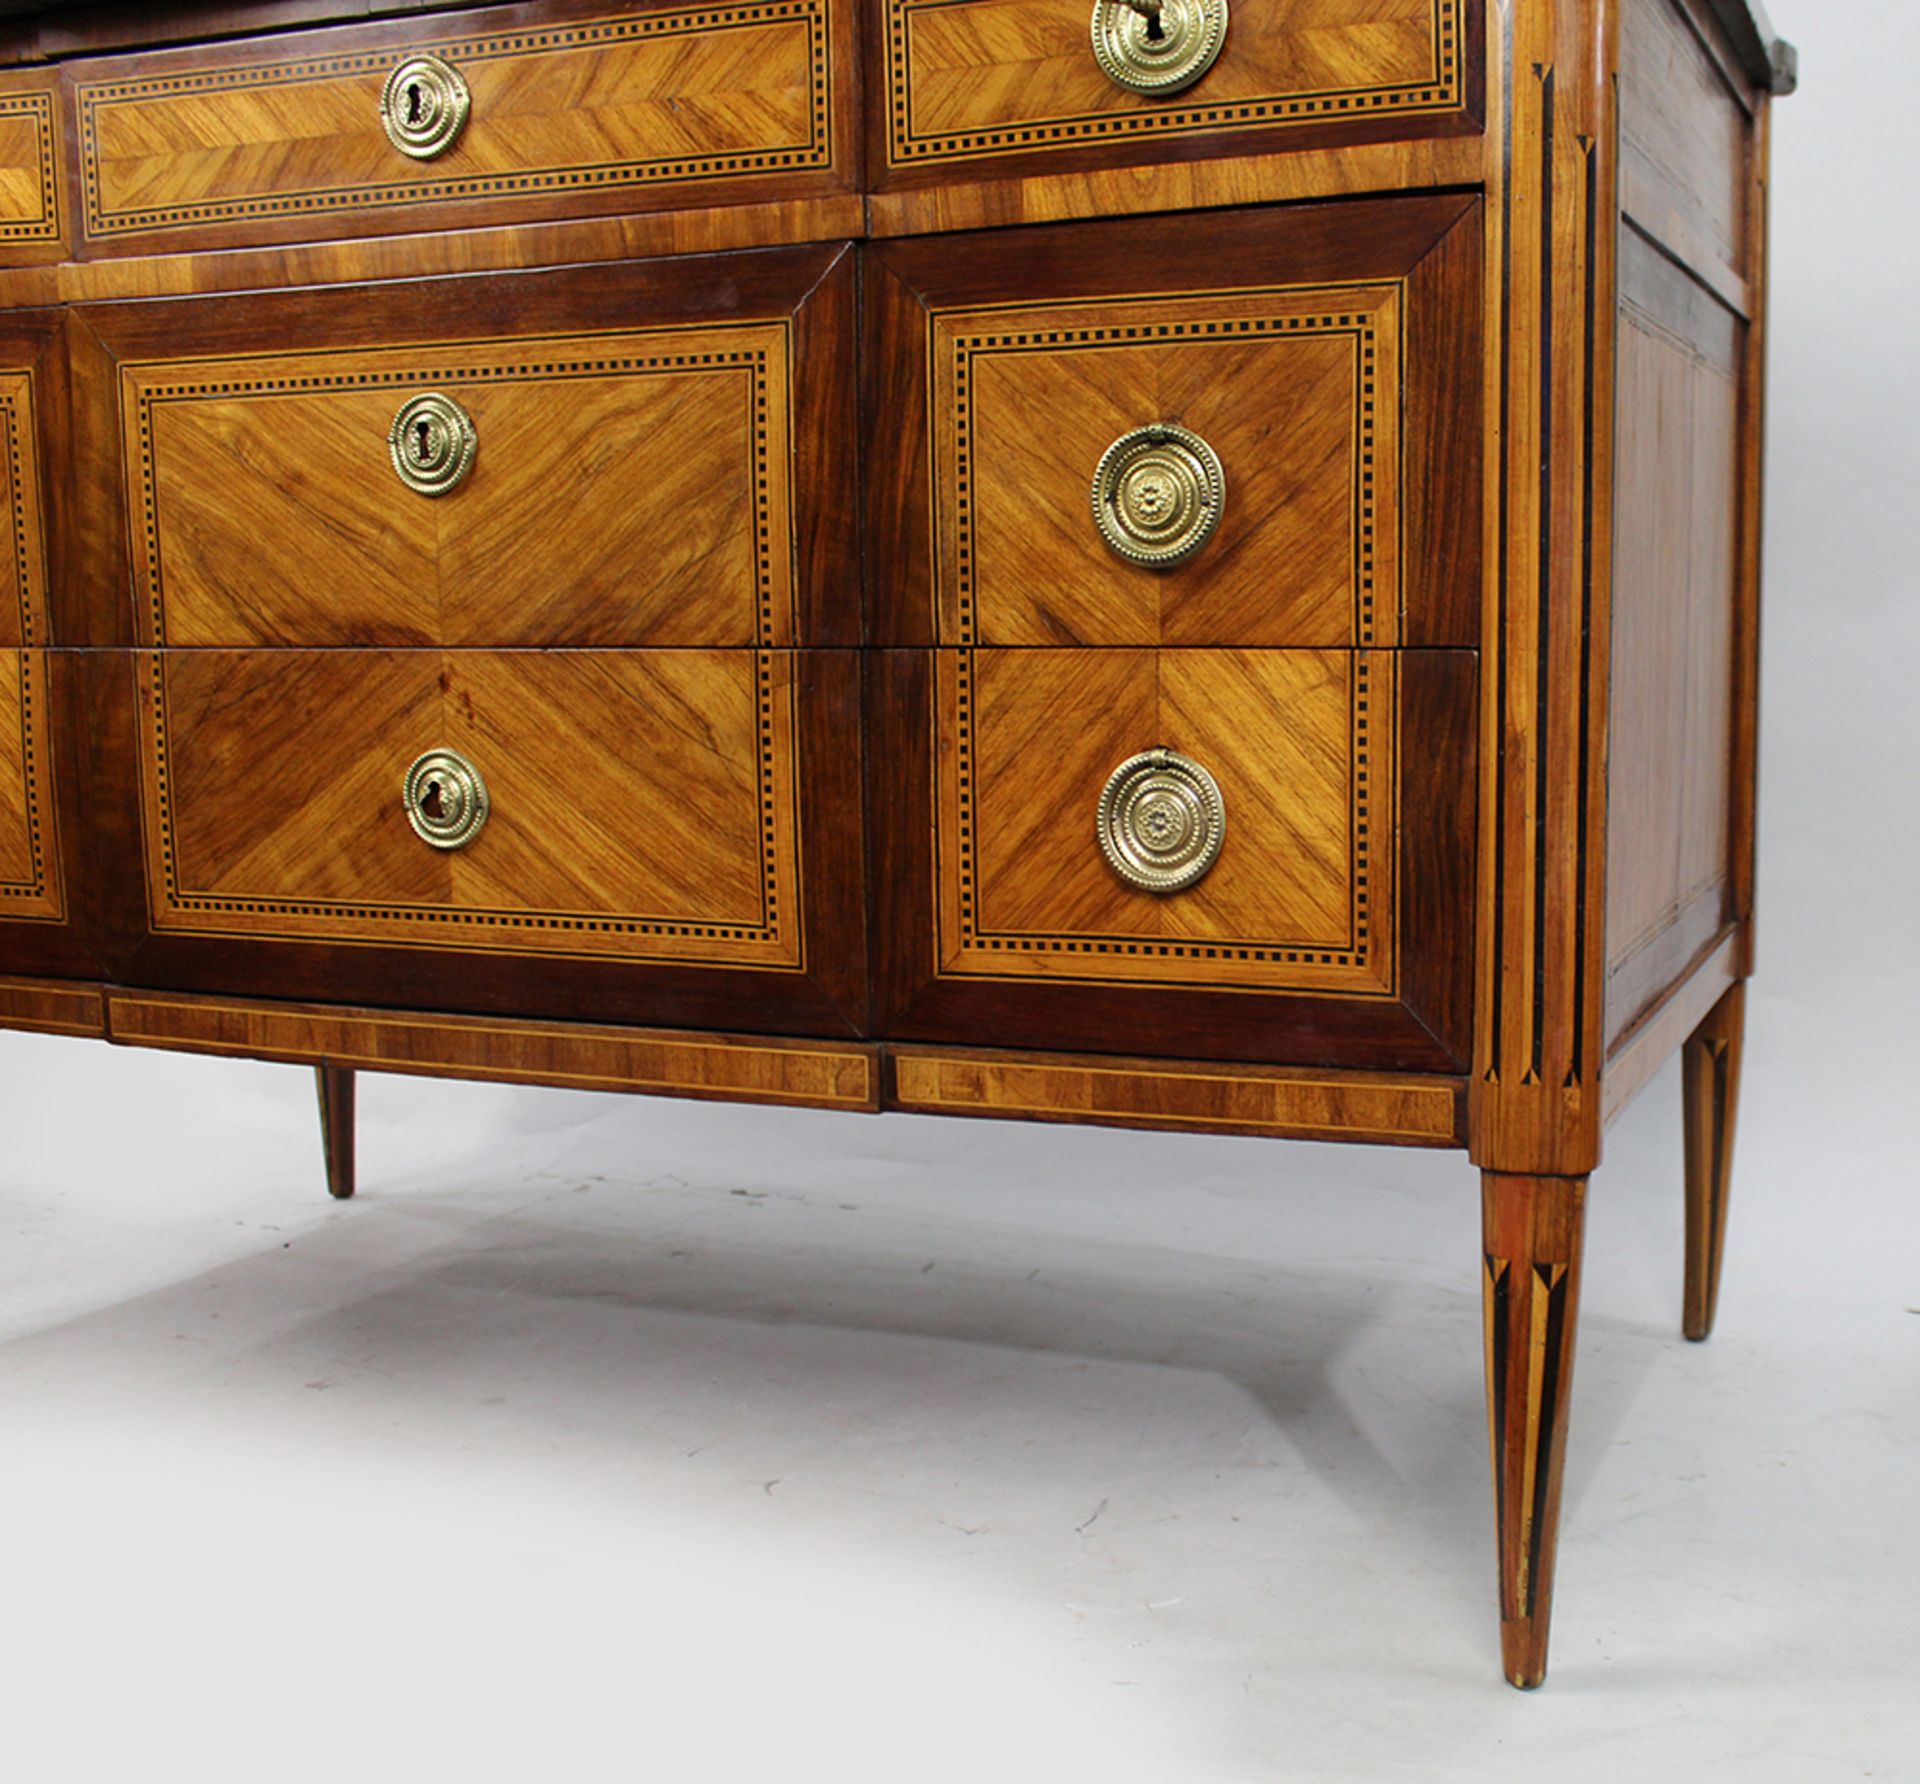 18th c. Inlaid Marble Topped Commode - Image 8 of 14